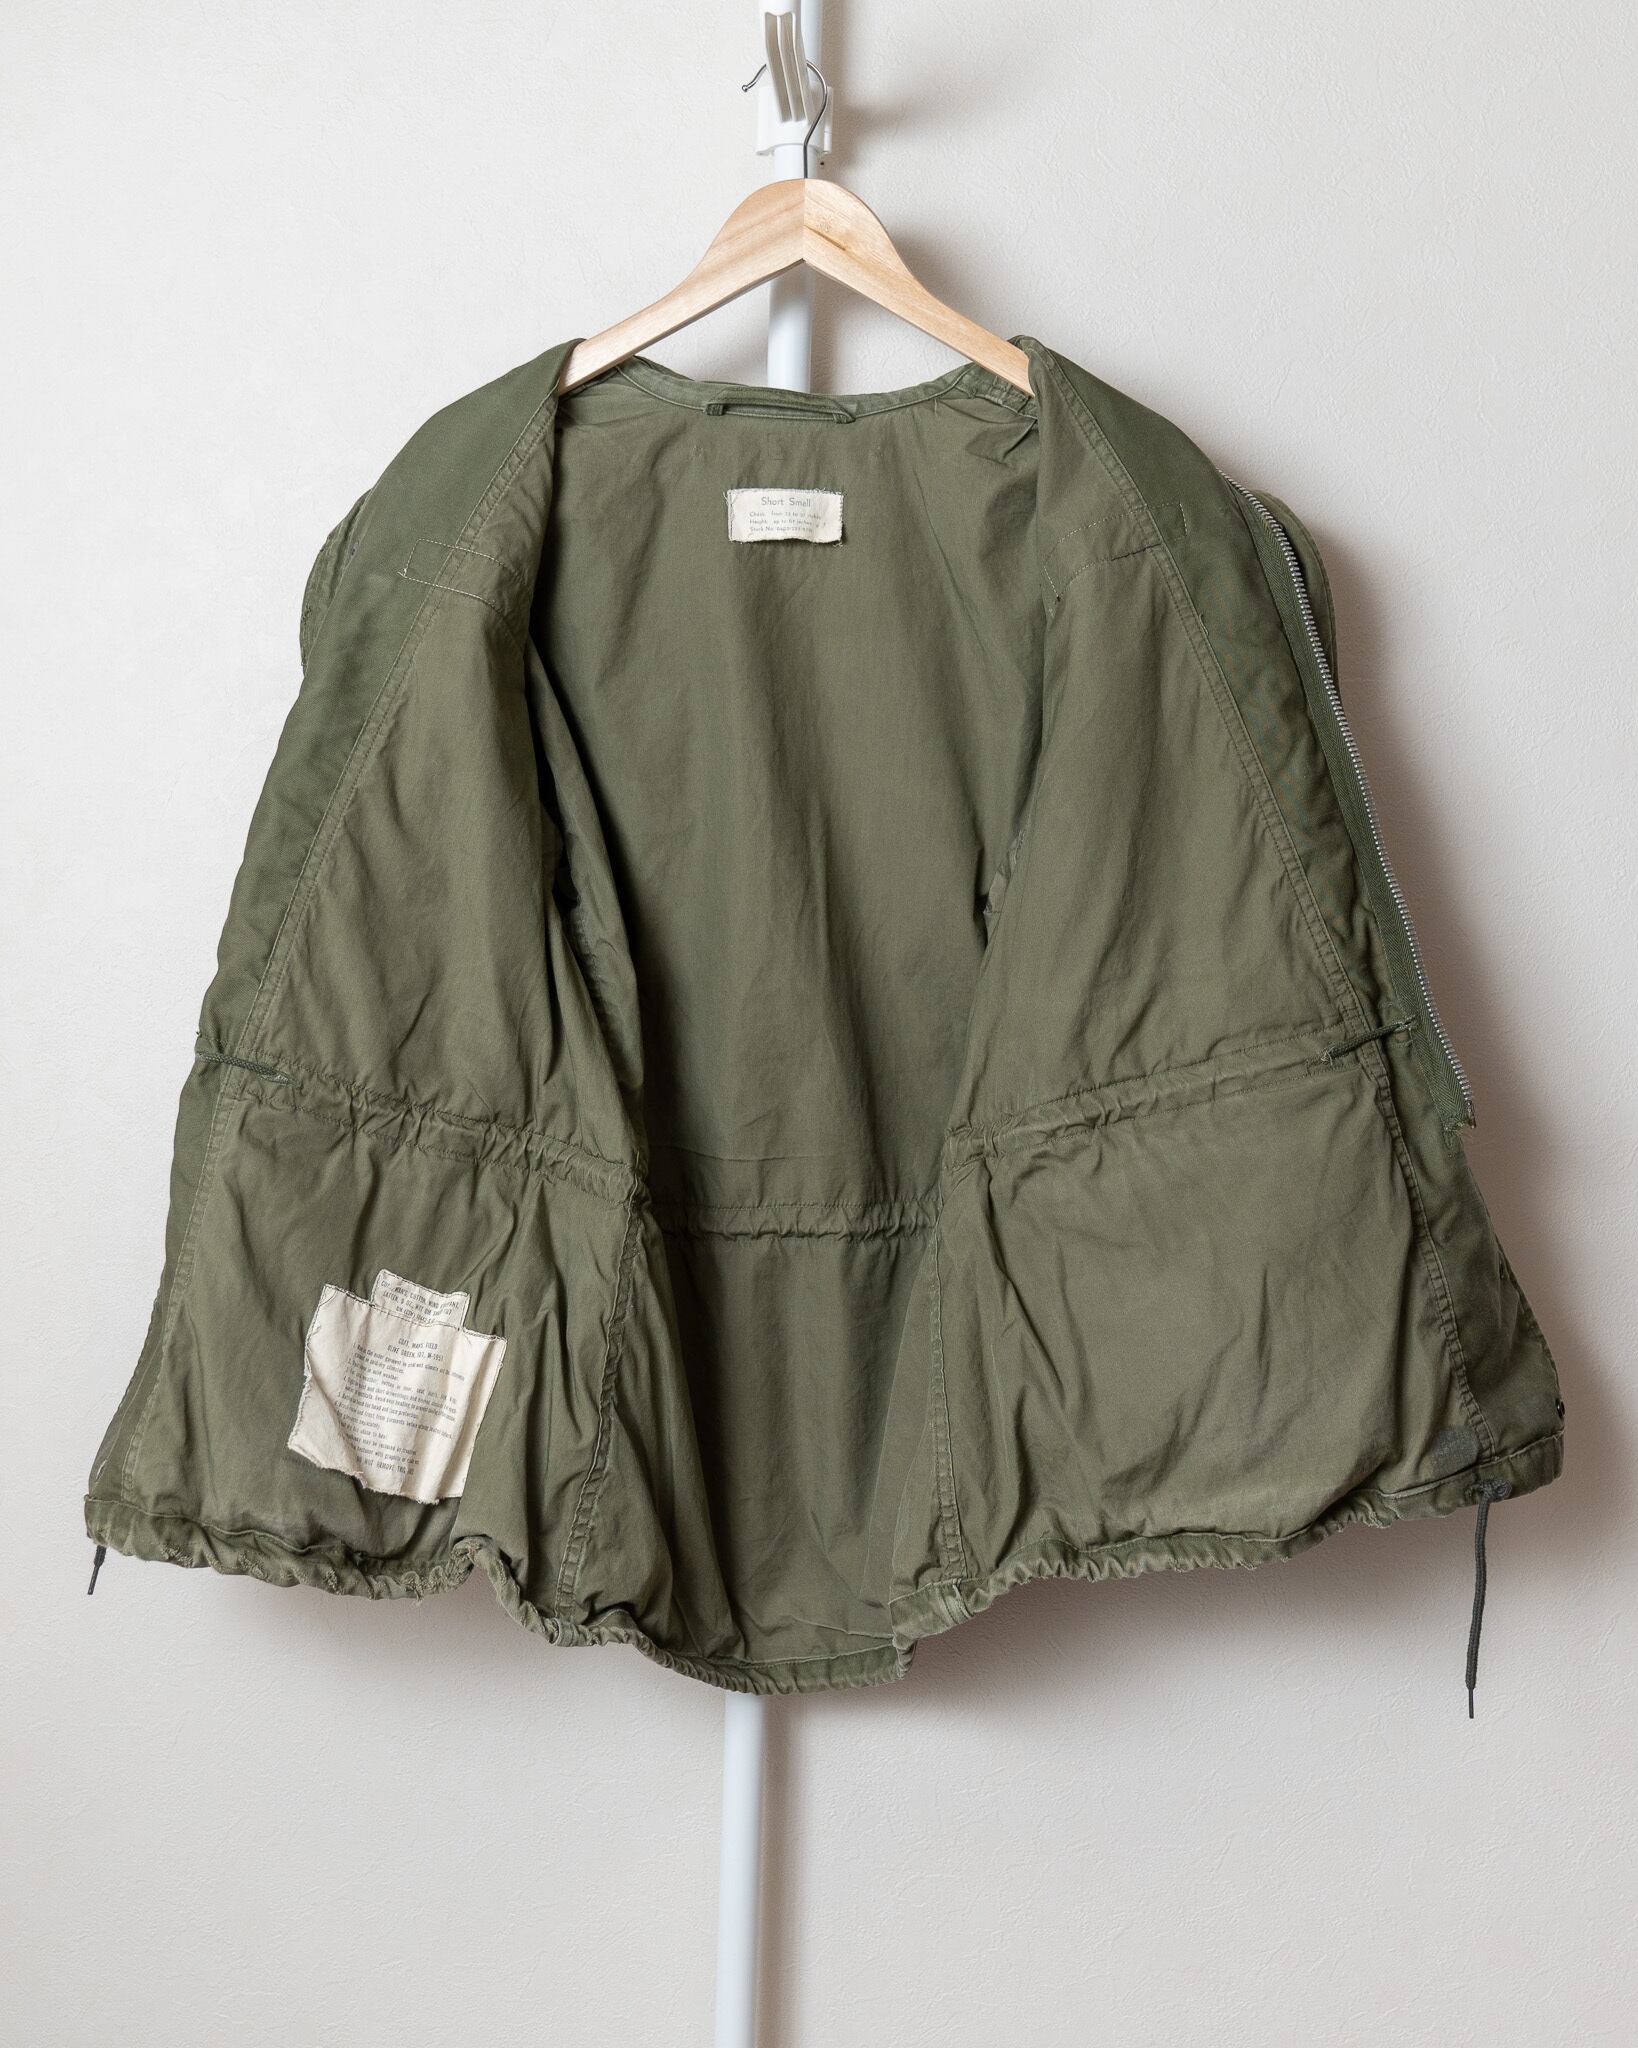 S SU.S.Army 's M Field Jacket "Used" アメリカ軍 M